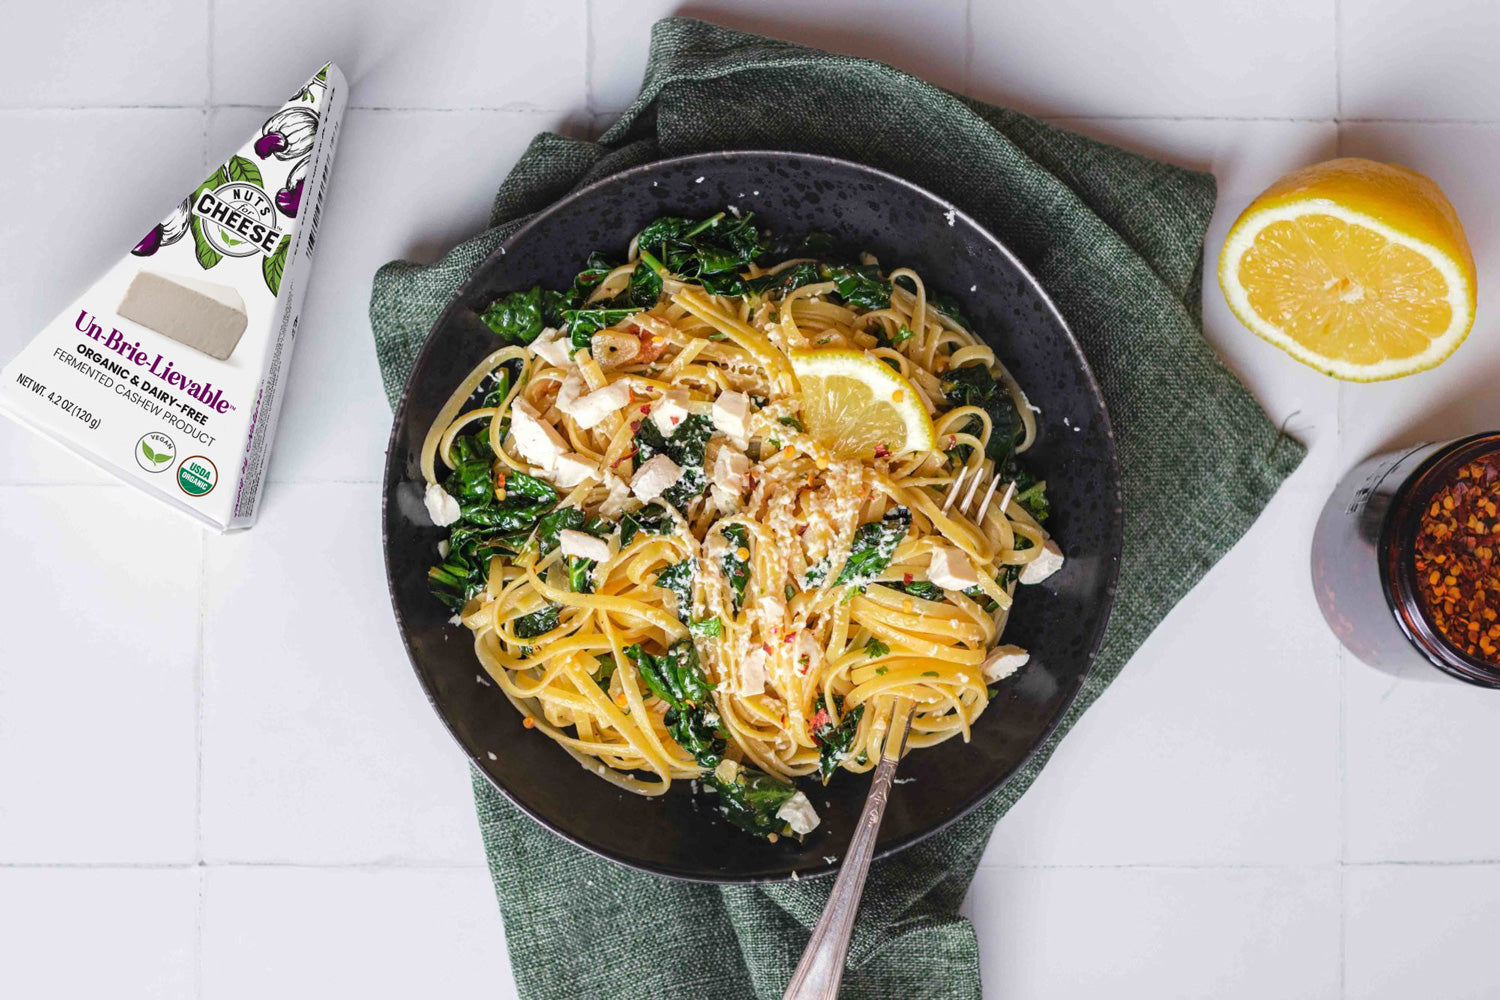 Vegan Garlic Oil Linguini and Kale plant-based dinner with Nuts For Cheese™ dairy-free Brie cheese wedge, lemon and chili flakes on the side